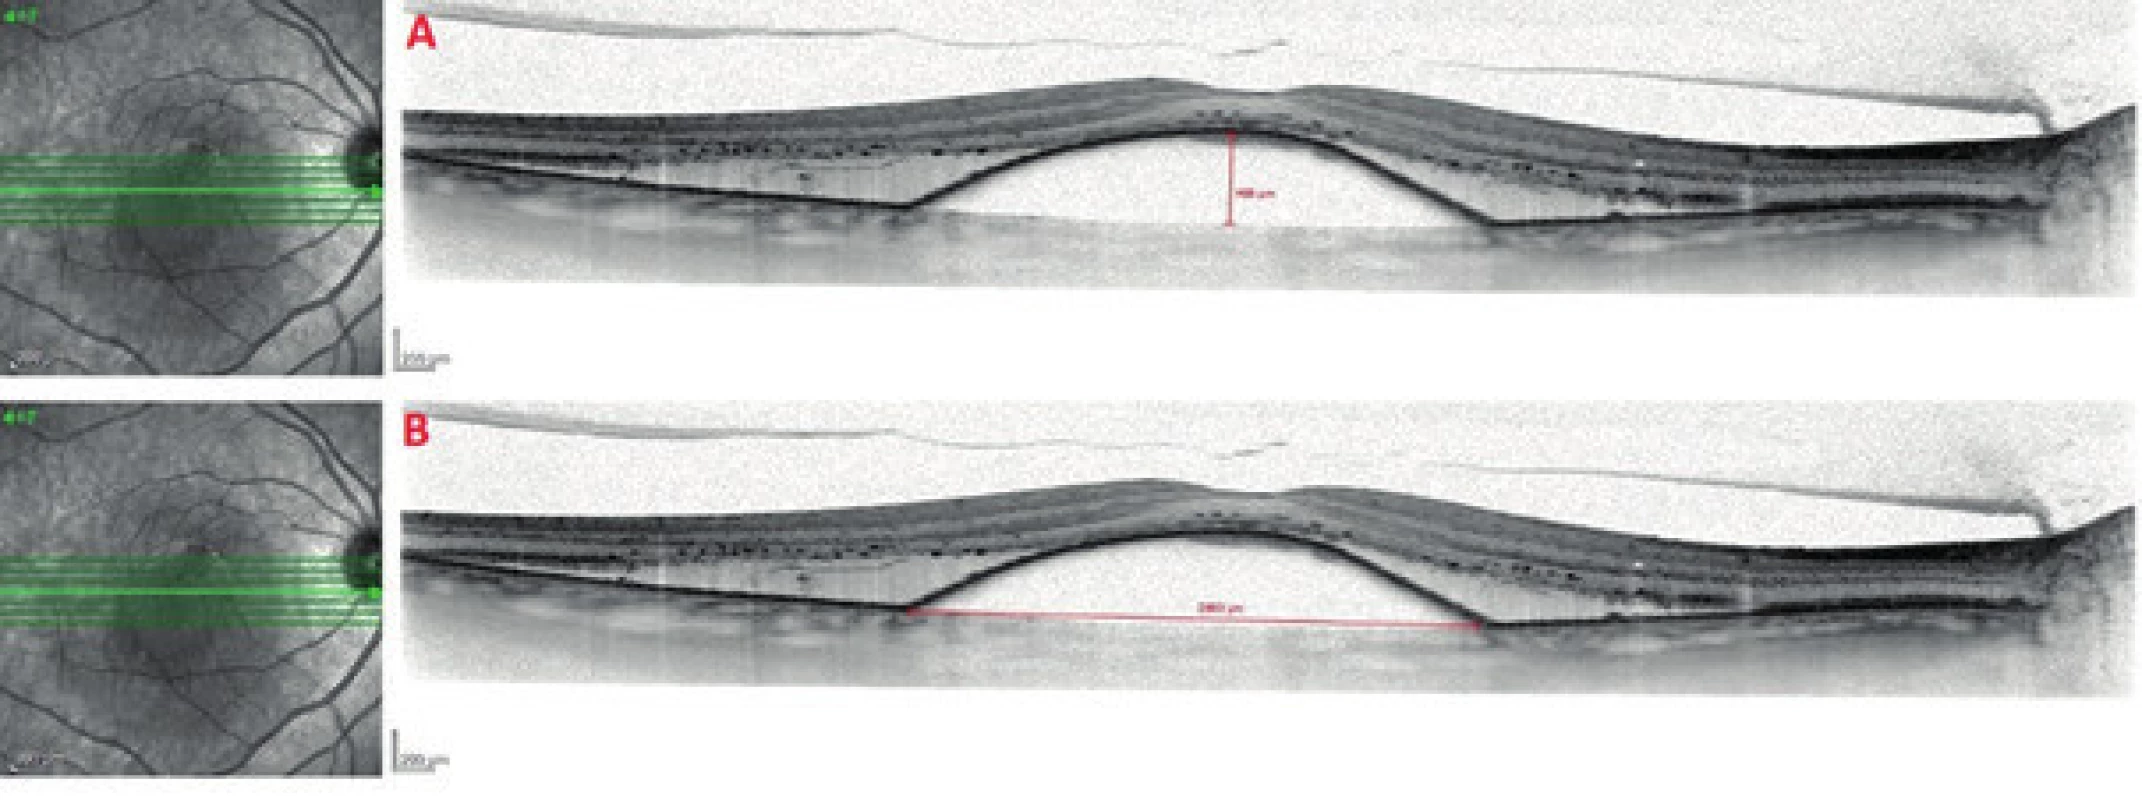 SD-OCT image of vascular serous detachment of retinal pigment epithelium upon a background of occult choroidal neovascularisation<br>
A. Method of measurement of height of RPE detachment<br>
B. Method of measurement of width of RPE detachment